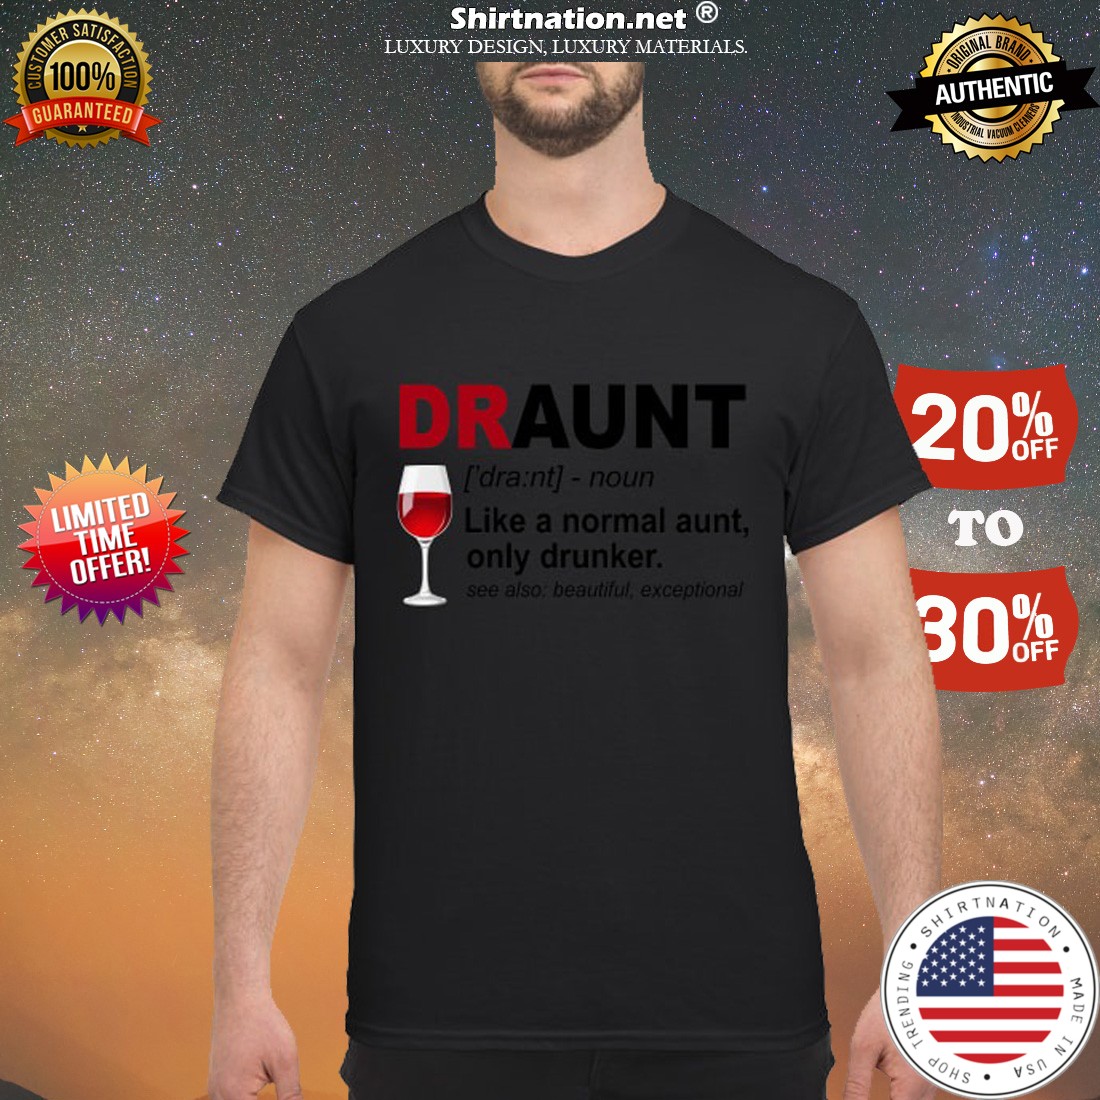 Draunt like a normal aunt only drunker shirt